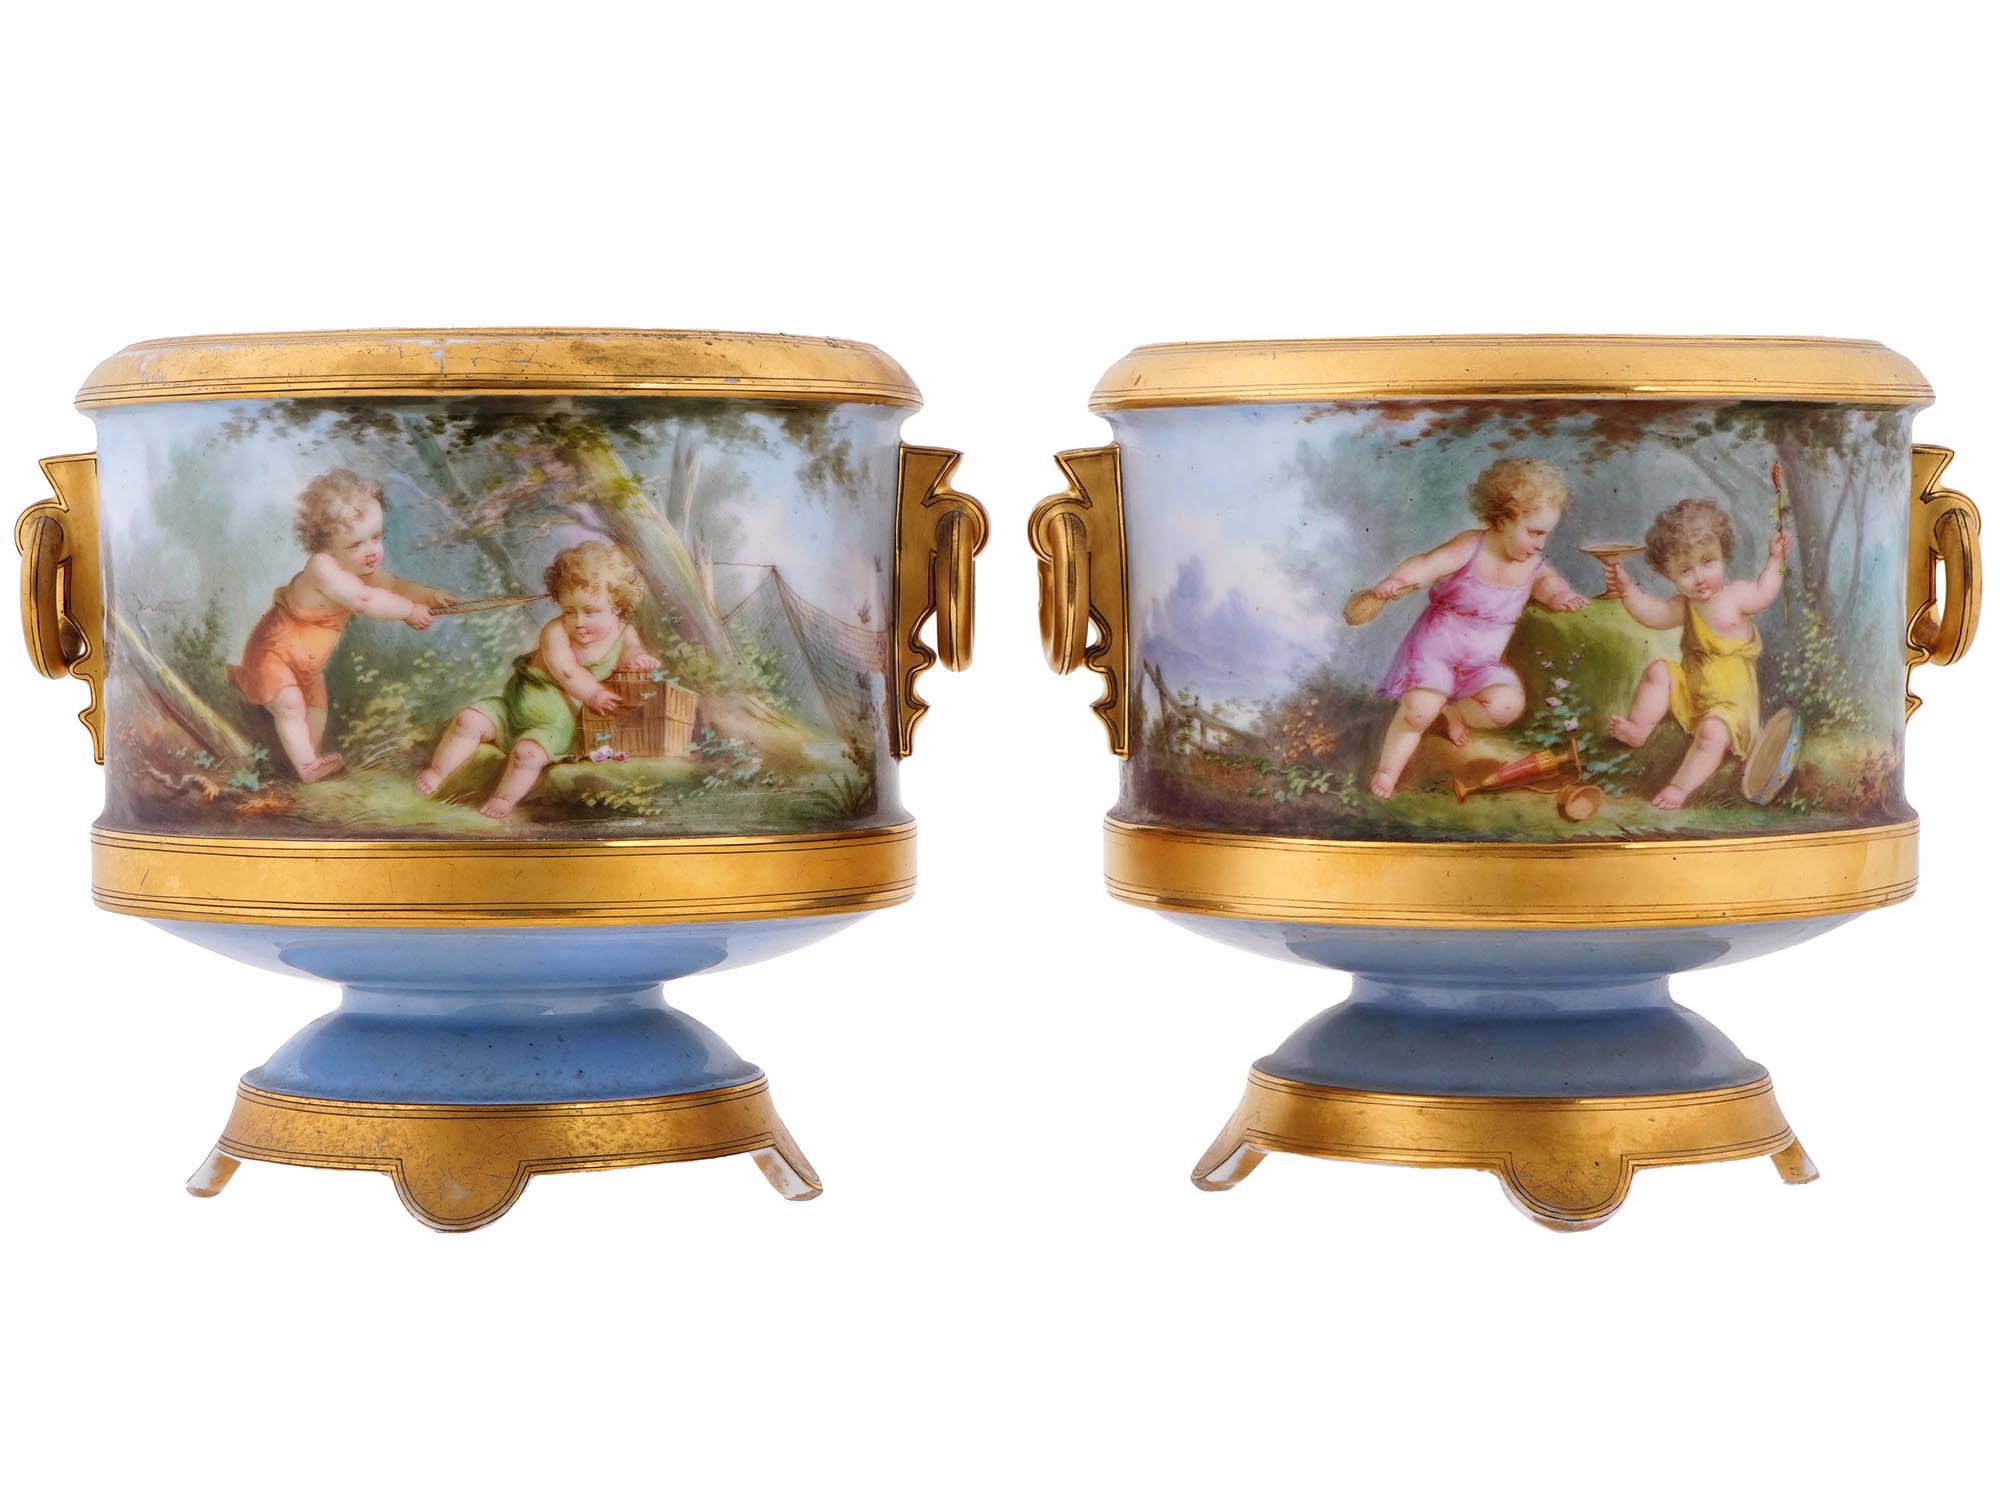 PAIR OF ANTIQUE 19TH C FRENCH PORCELAIN URNS PIC-0